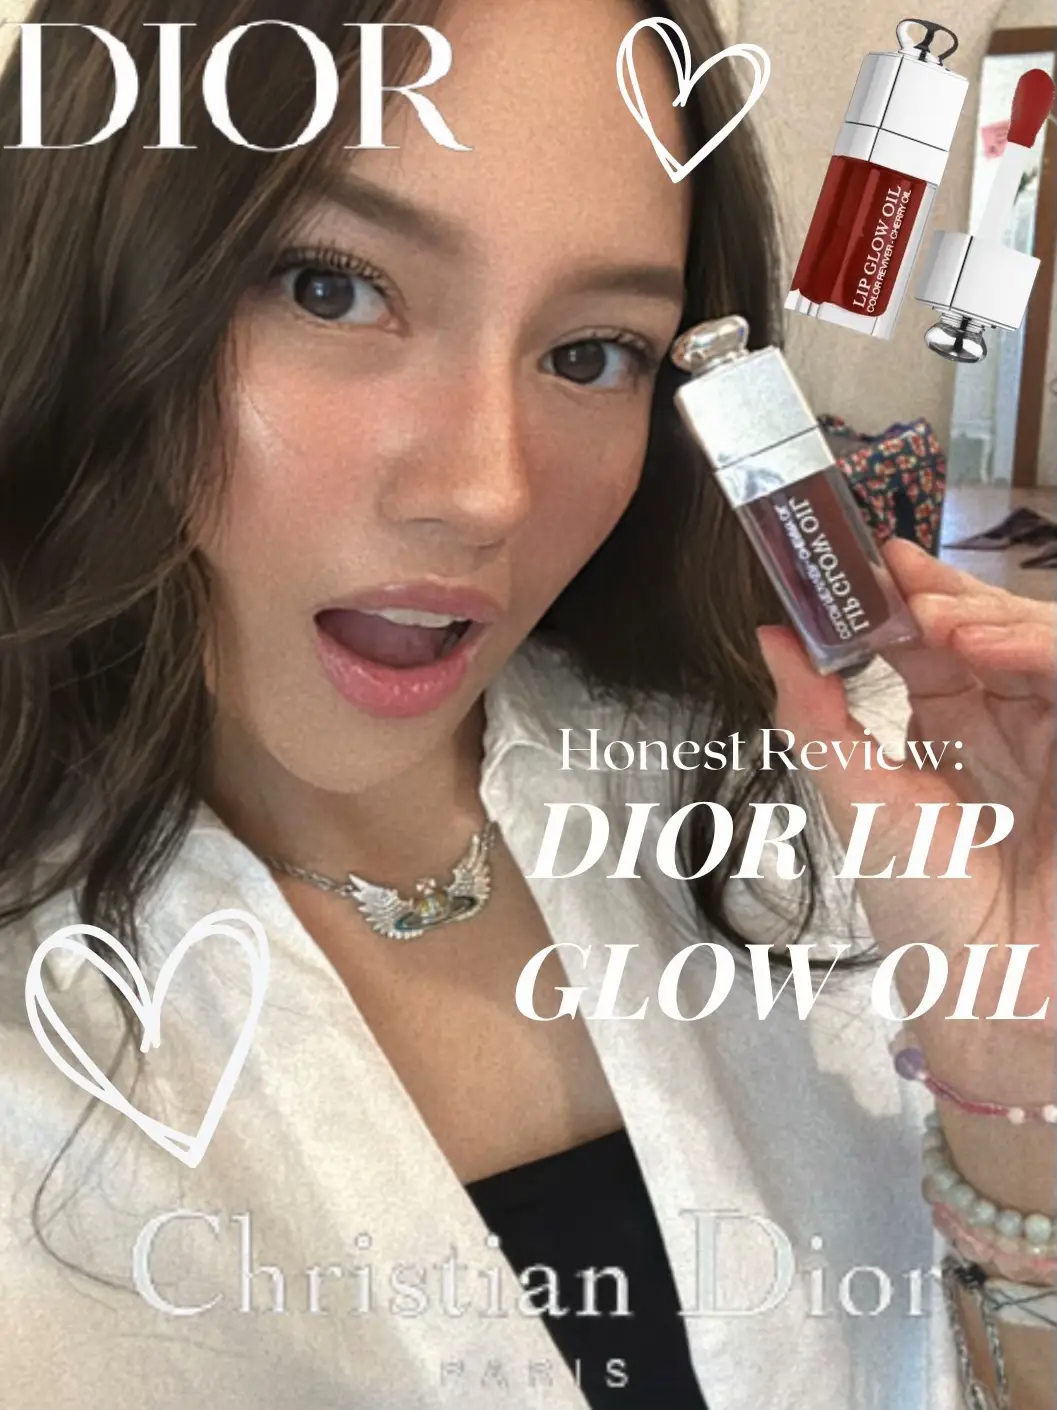 Dior Lip Glow Oil Honest Review, Gallery posted by Nadia Annisa